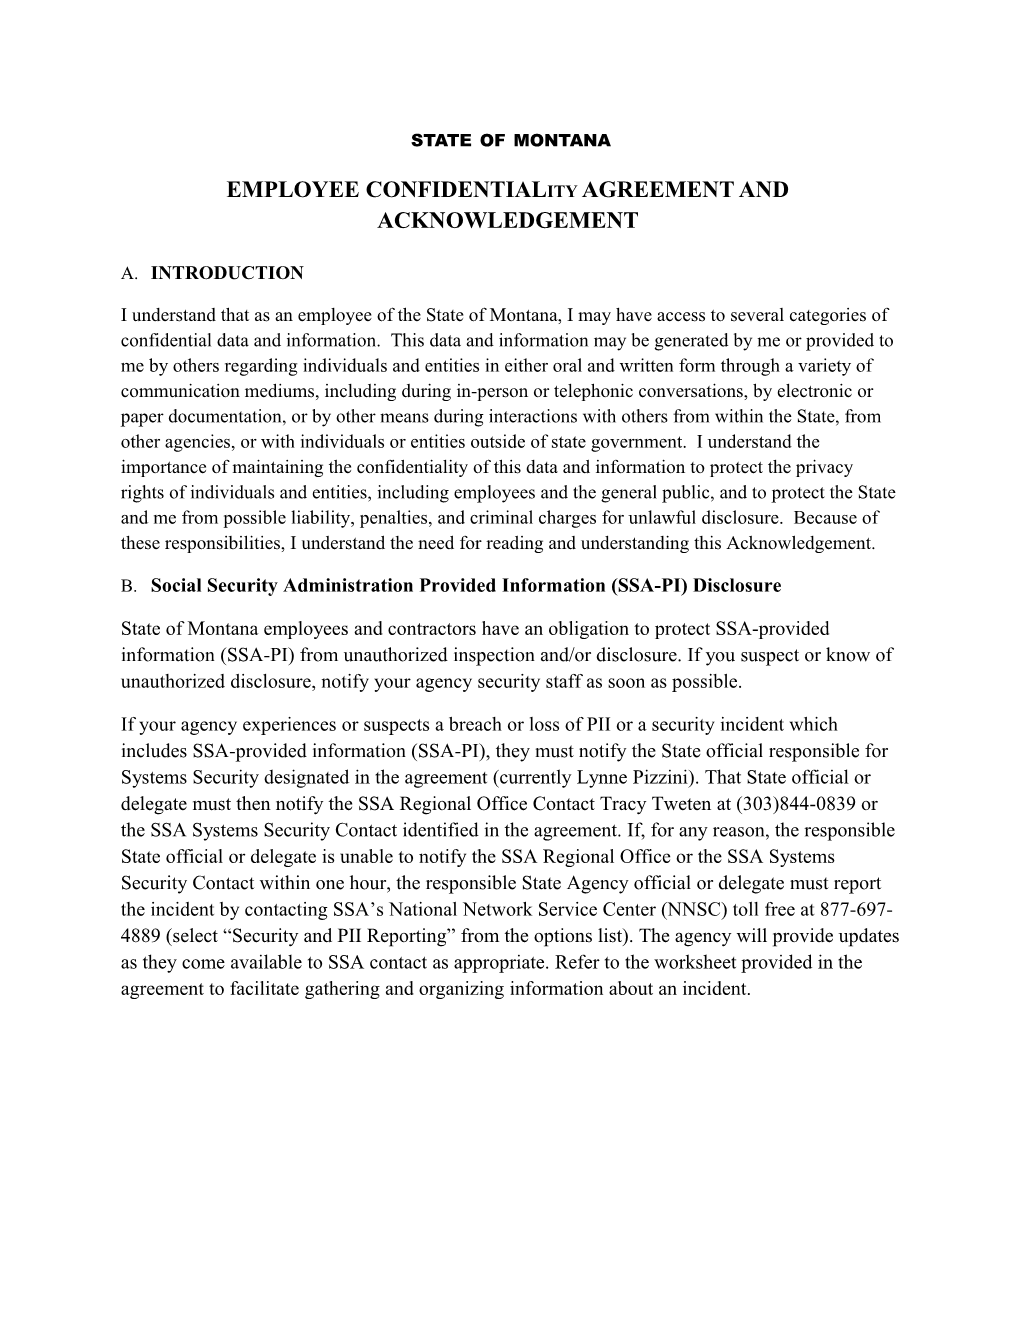 EMPLOYEE Confidentiality AGREEMENT AND